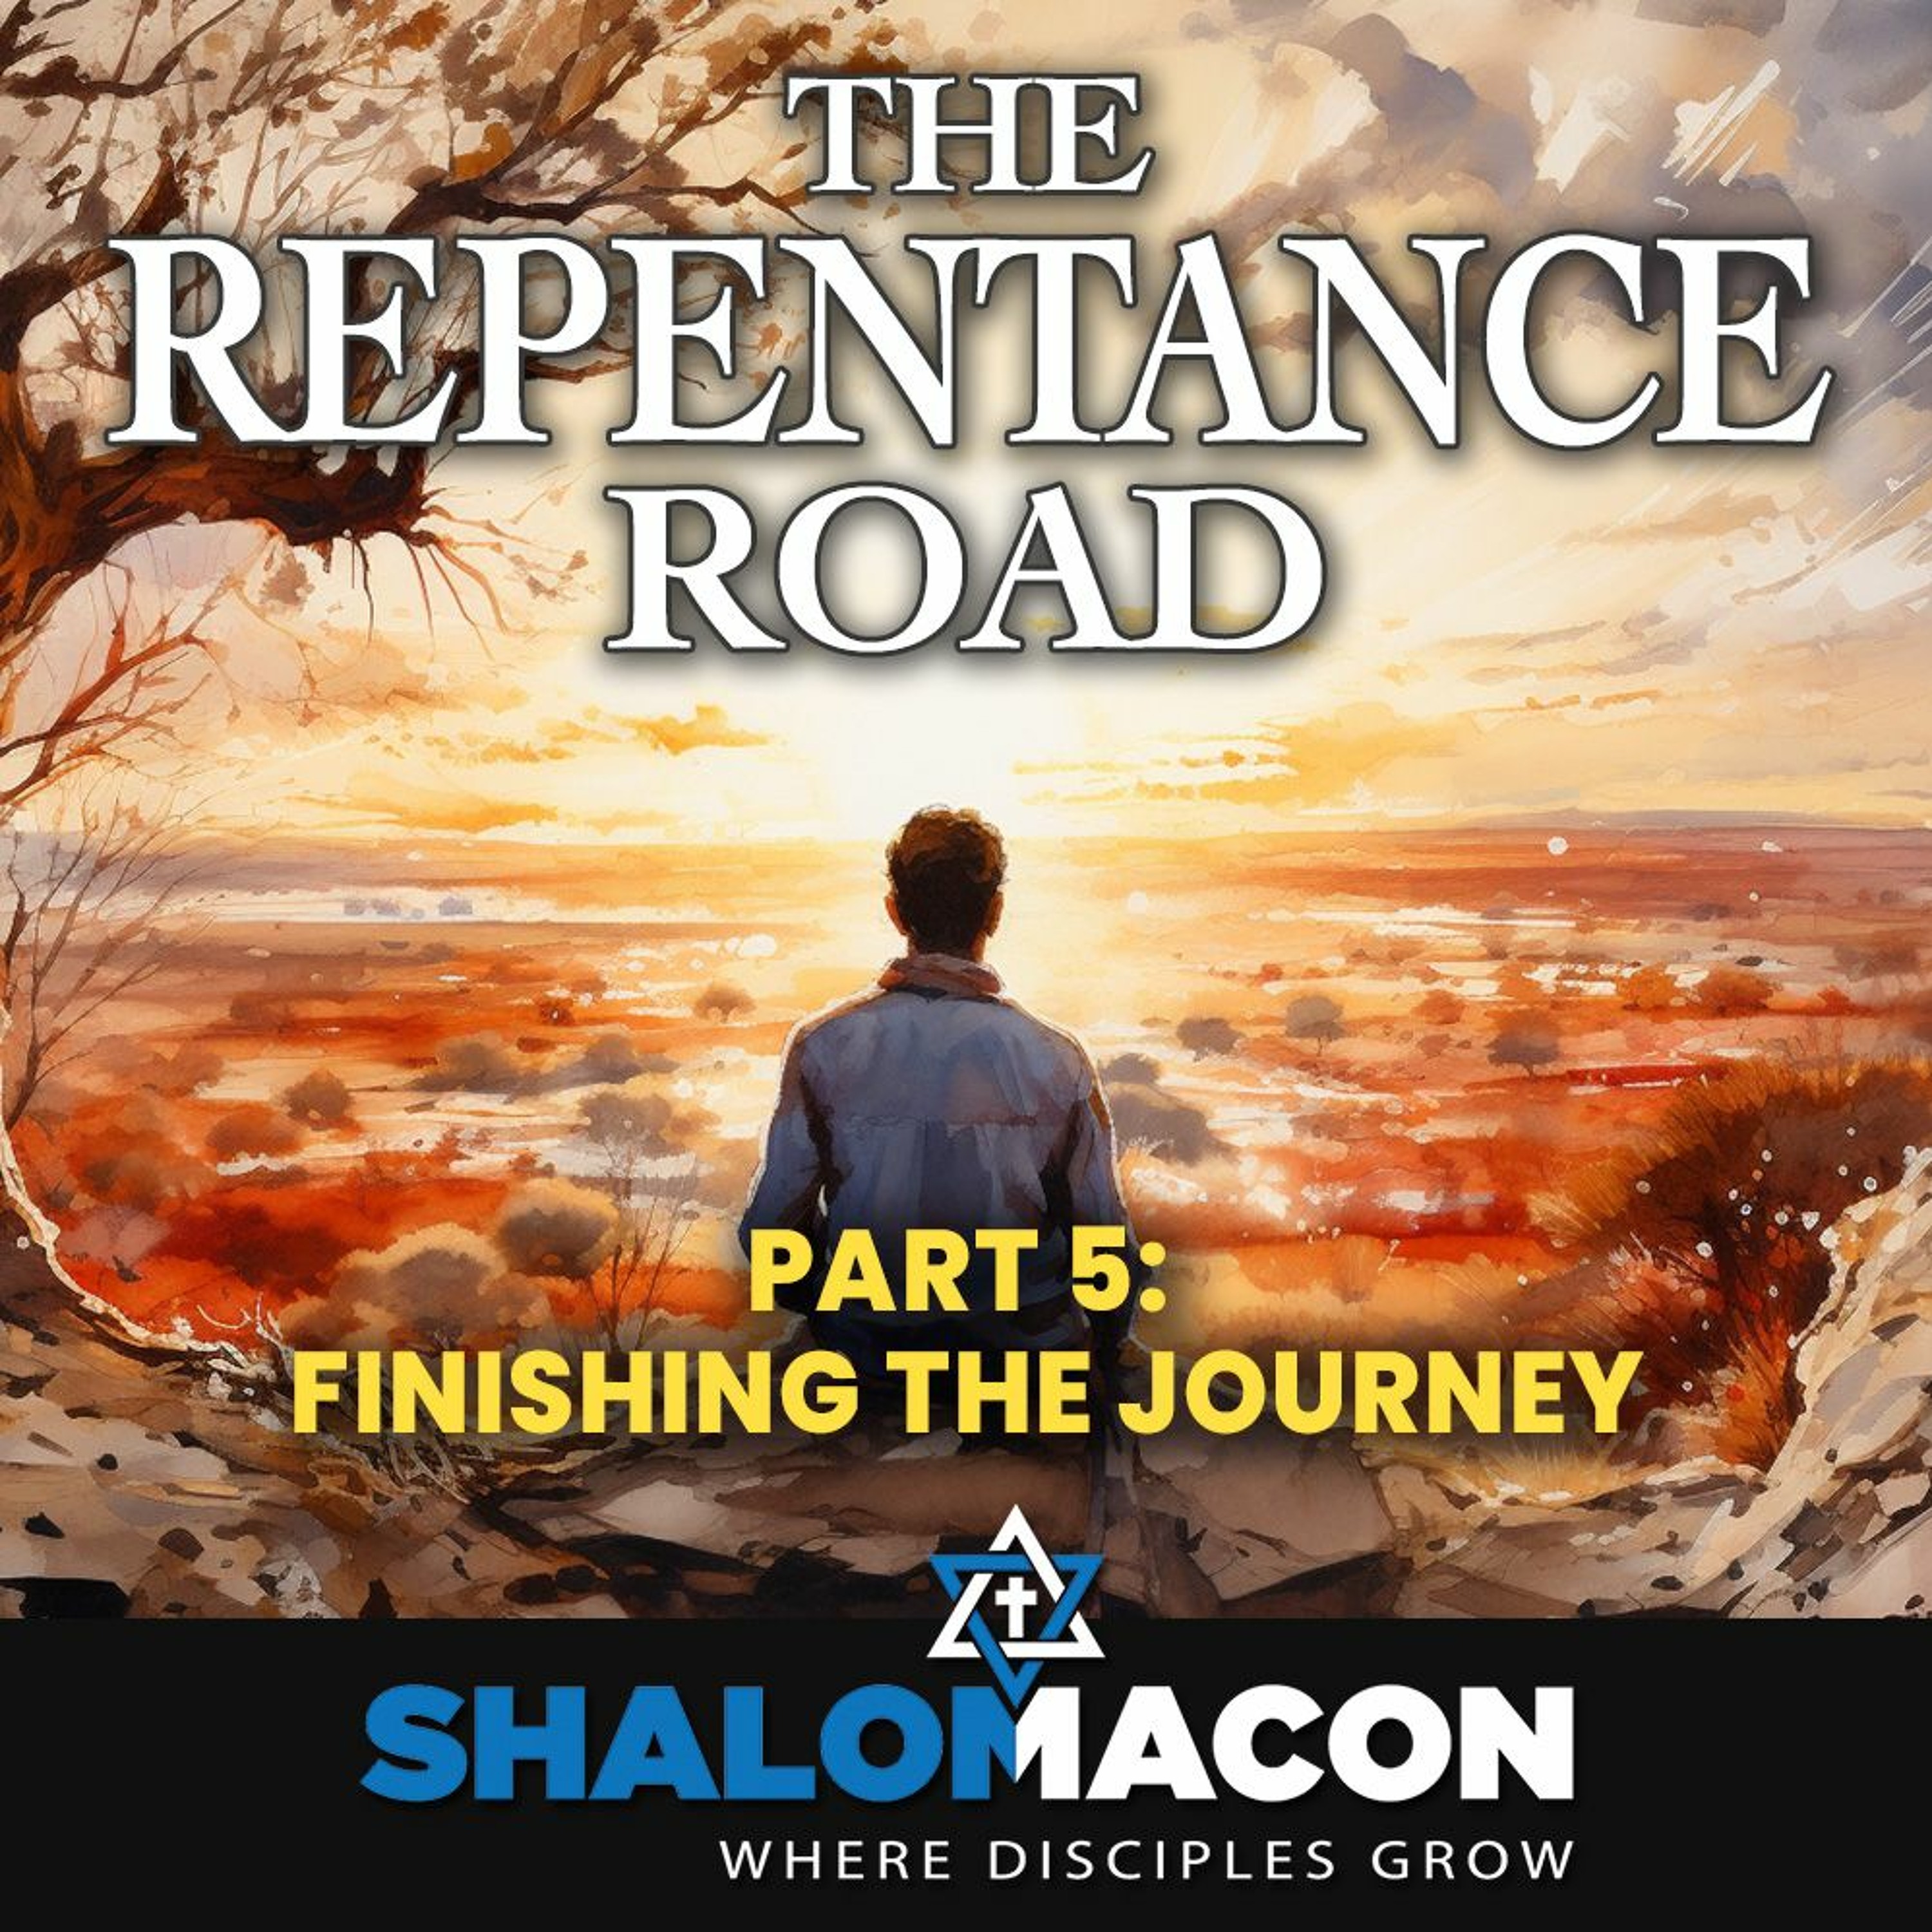 The Repentance Road, Part 5: Finishing the Journey